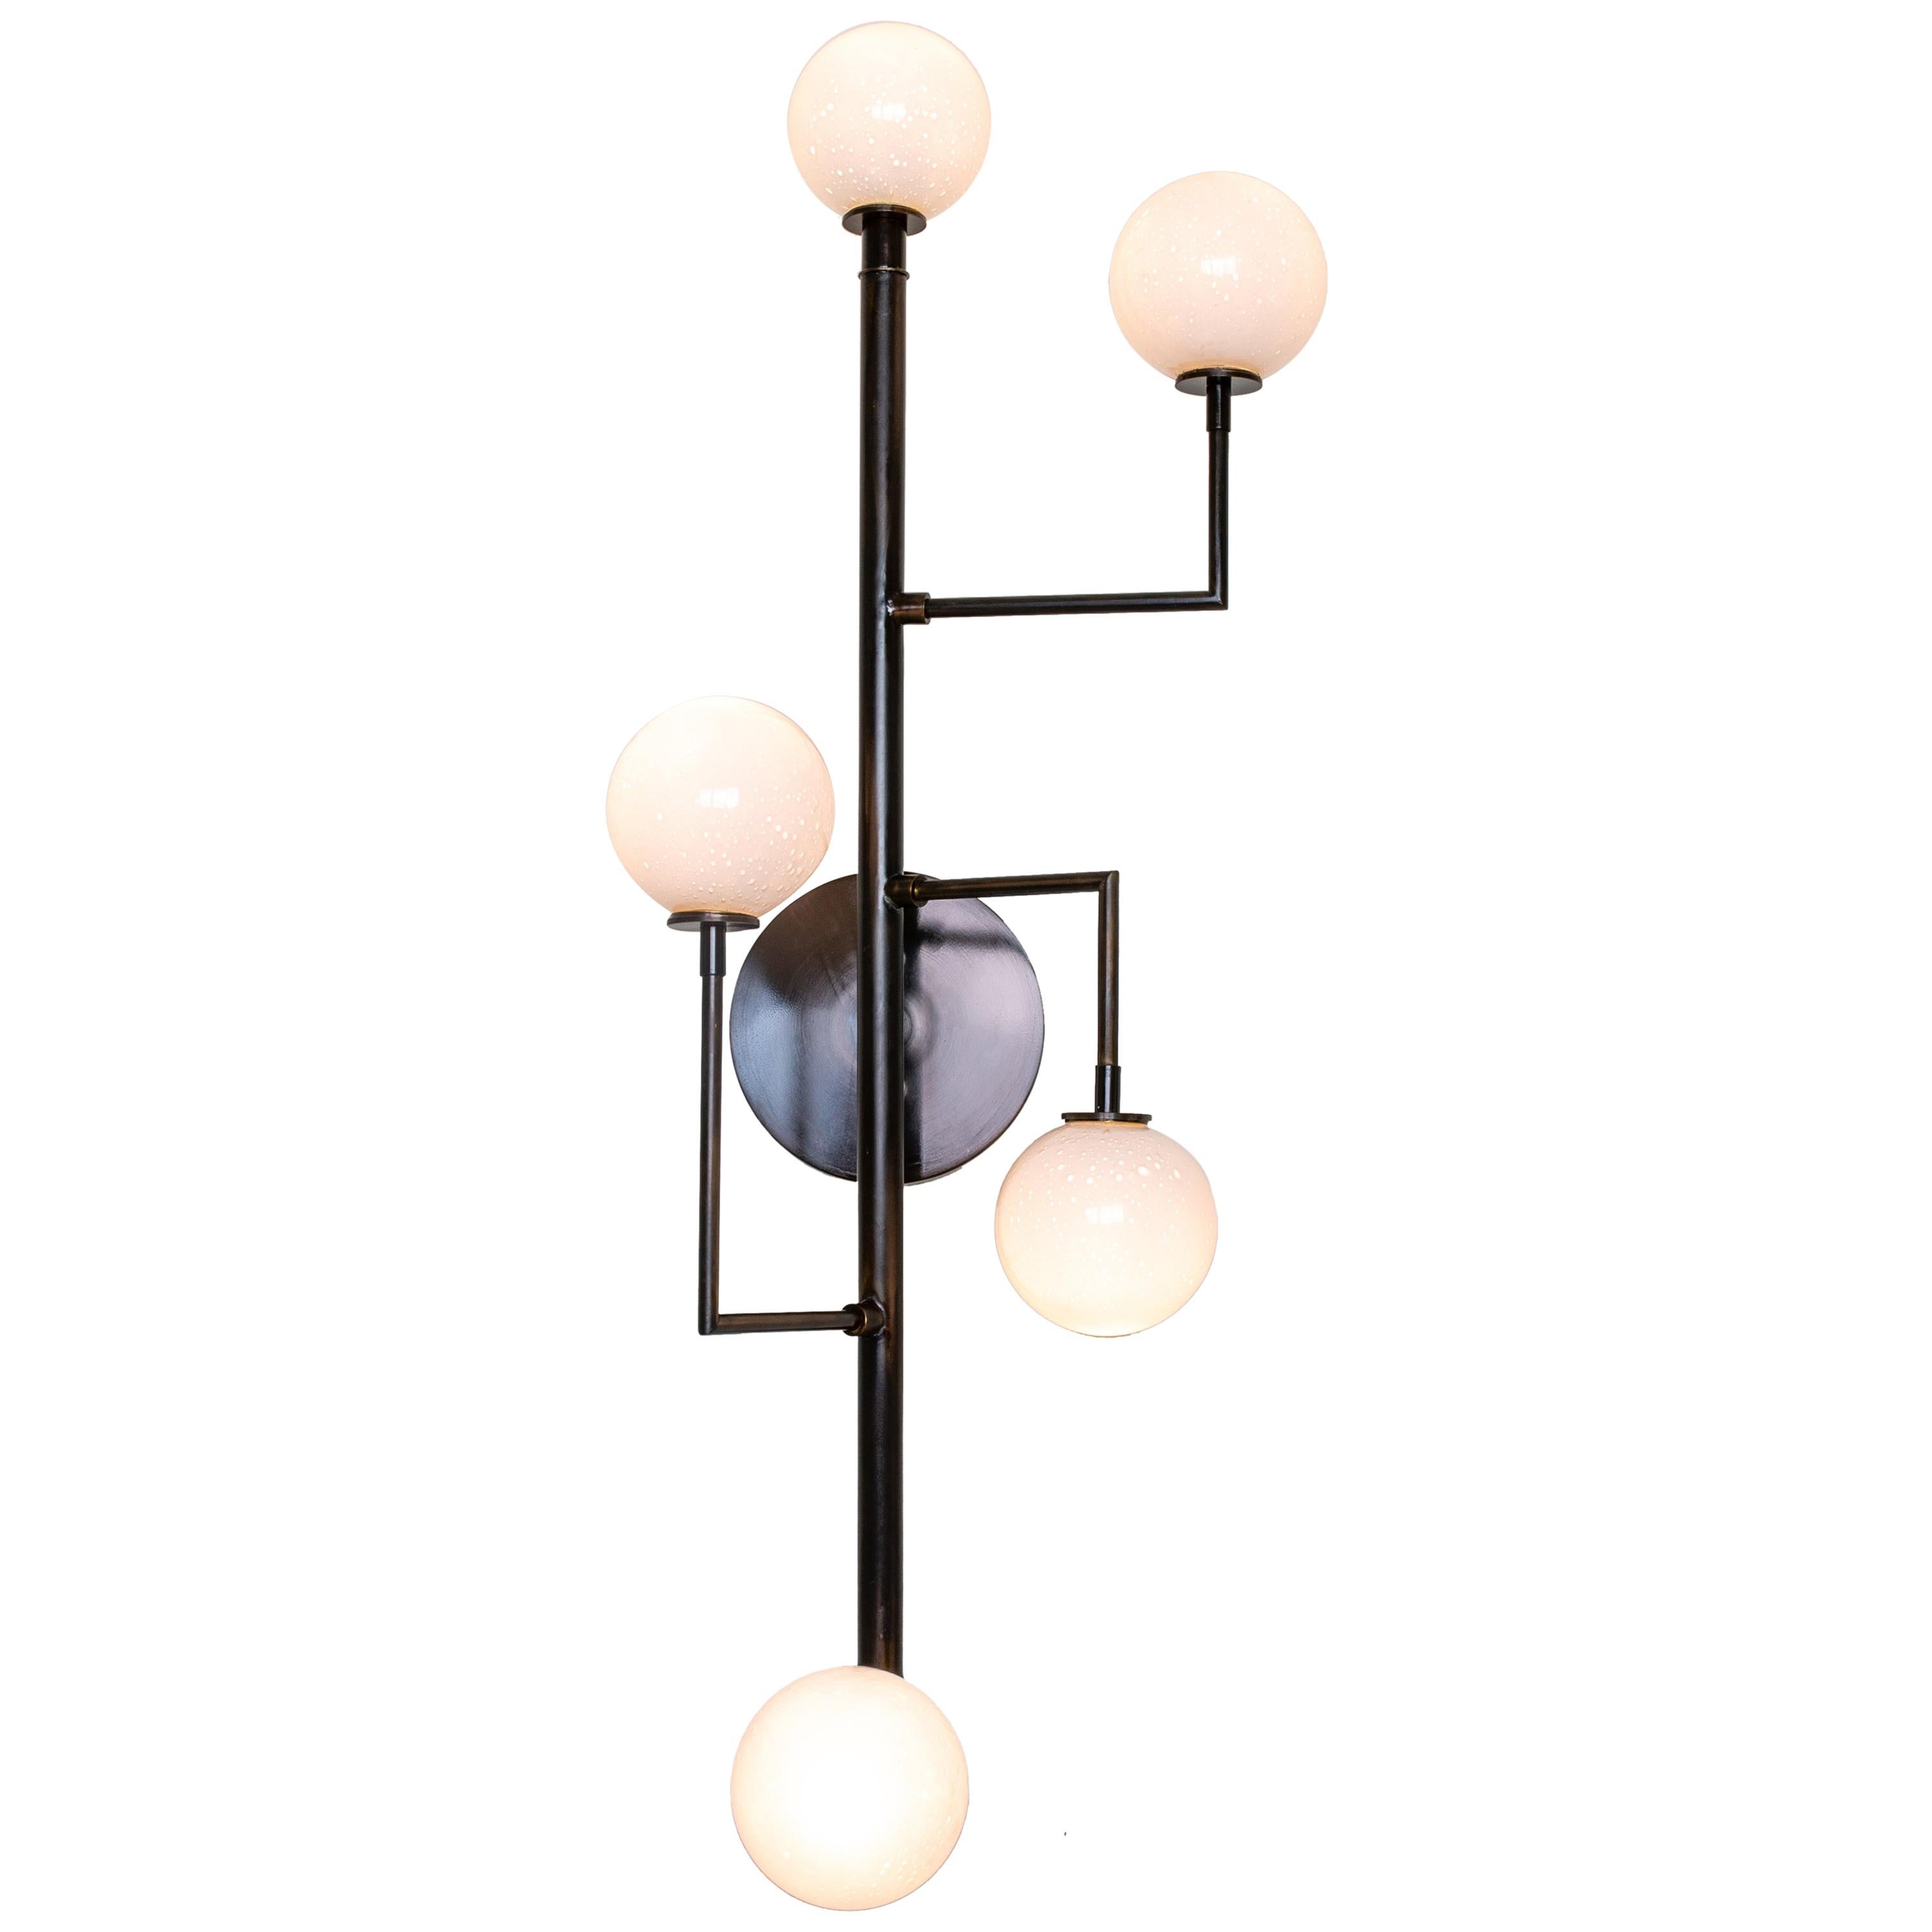 Halo Sconce 5:: Brass:: Hand Blown Glass Contemporary Wall Sconce:: Kalin Asenov